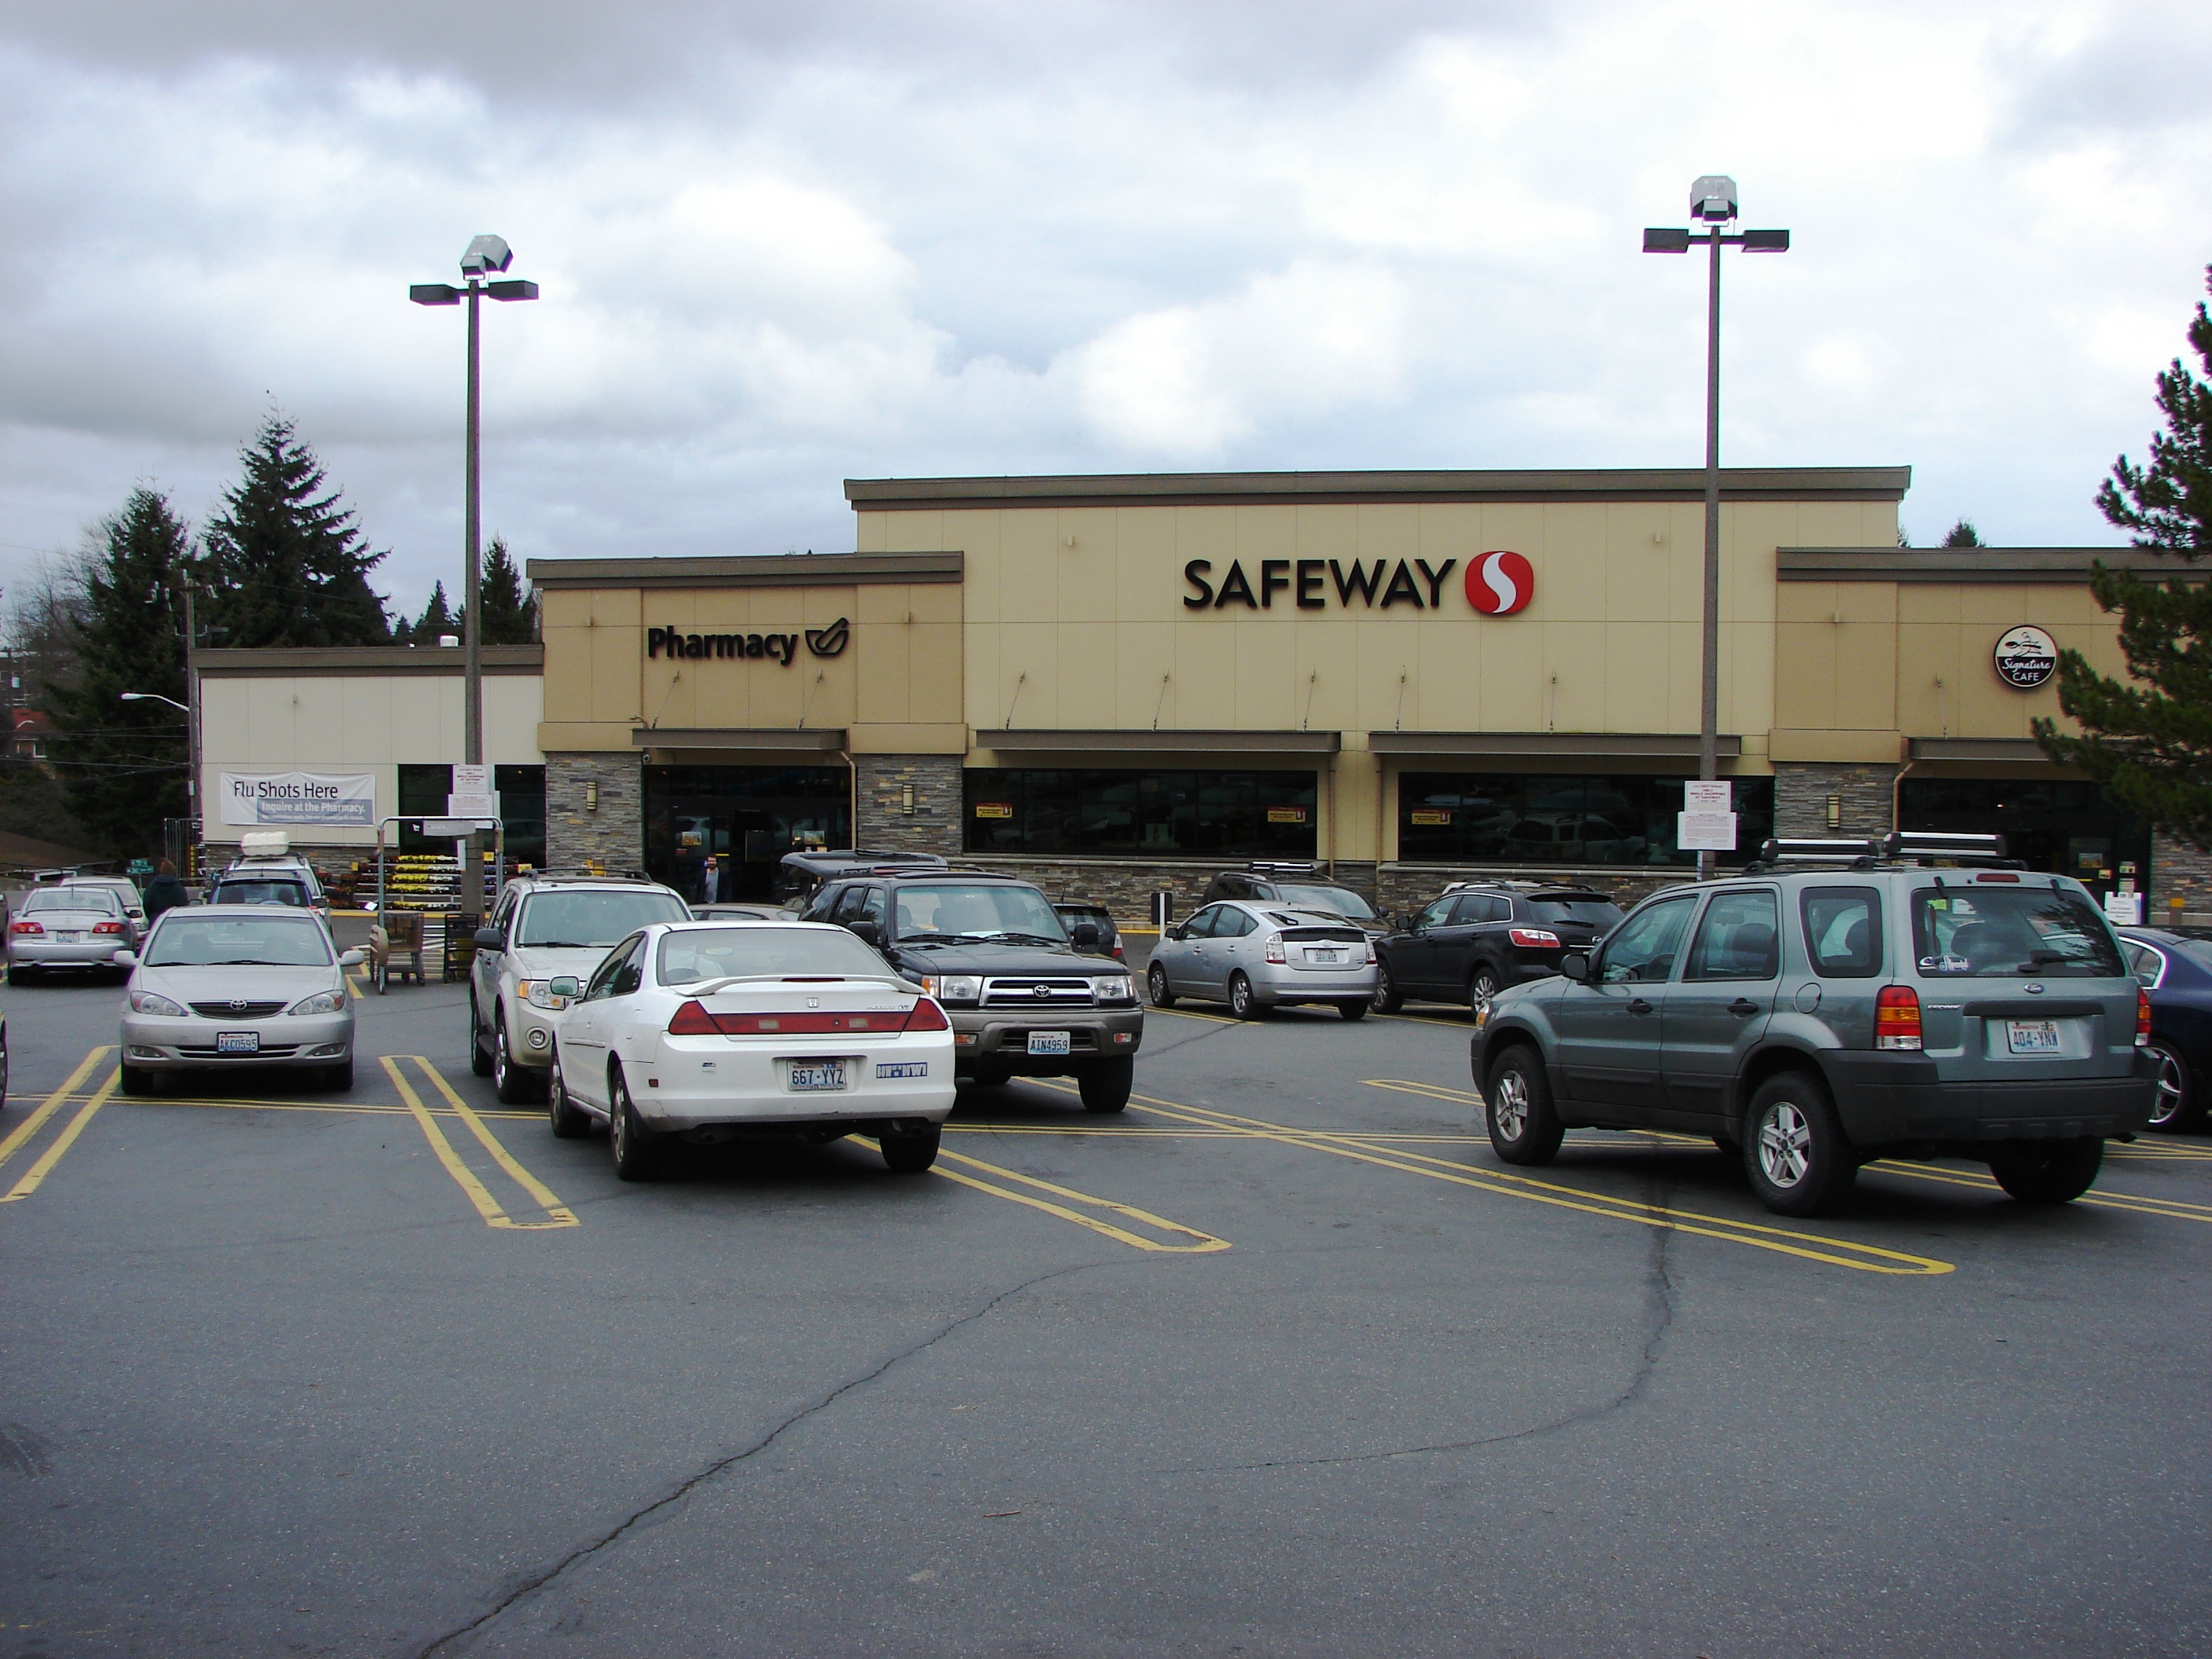 The Wedgwood Safeway | Wedgwood in Seattle History